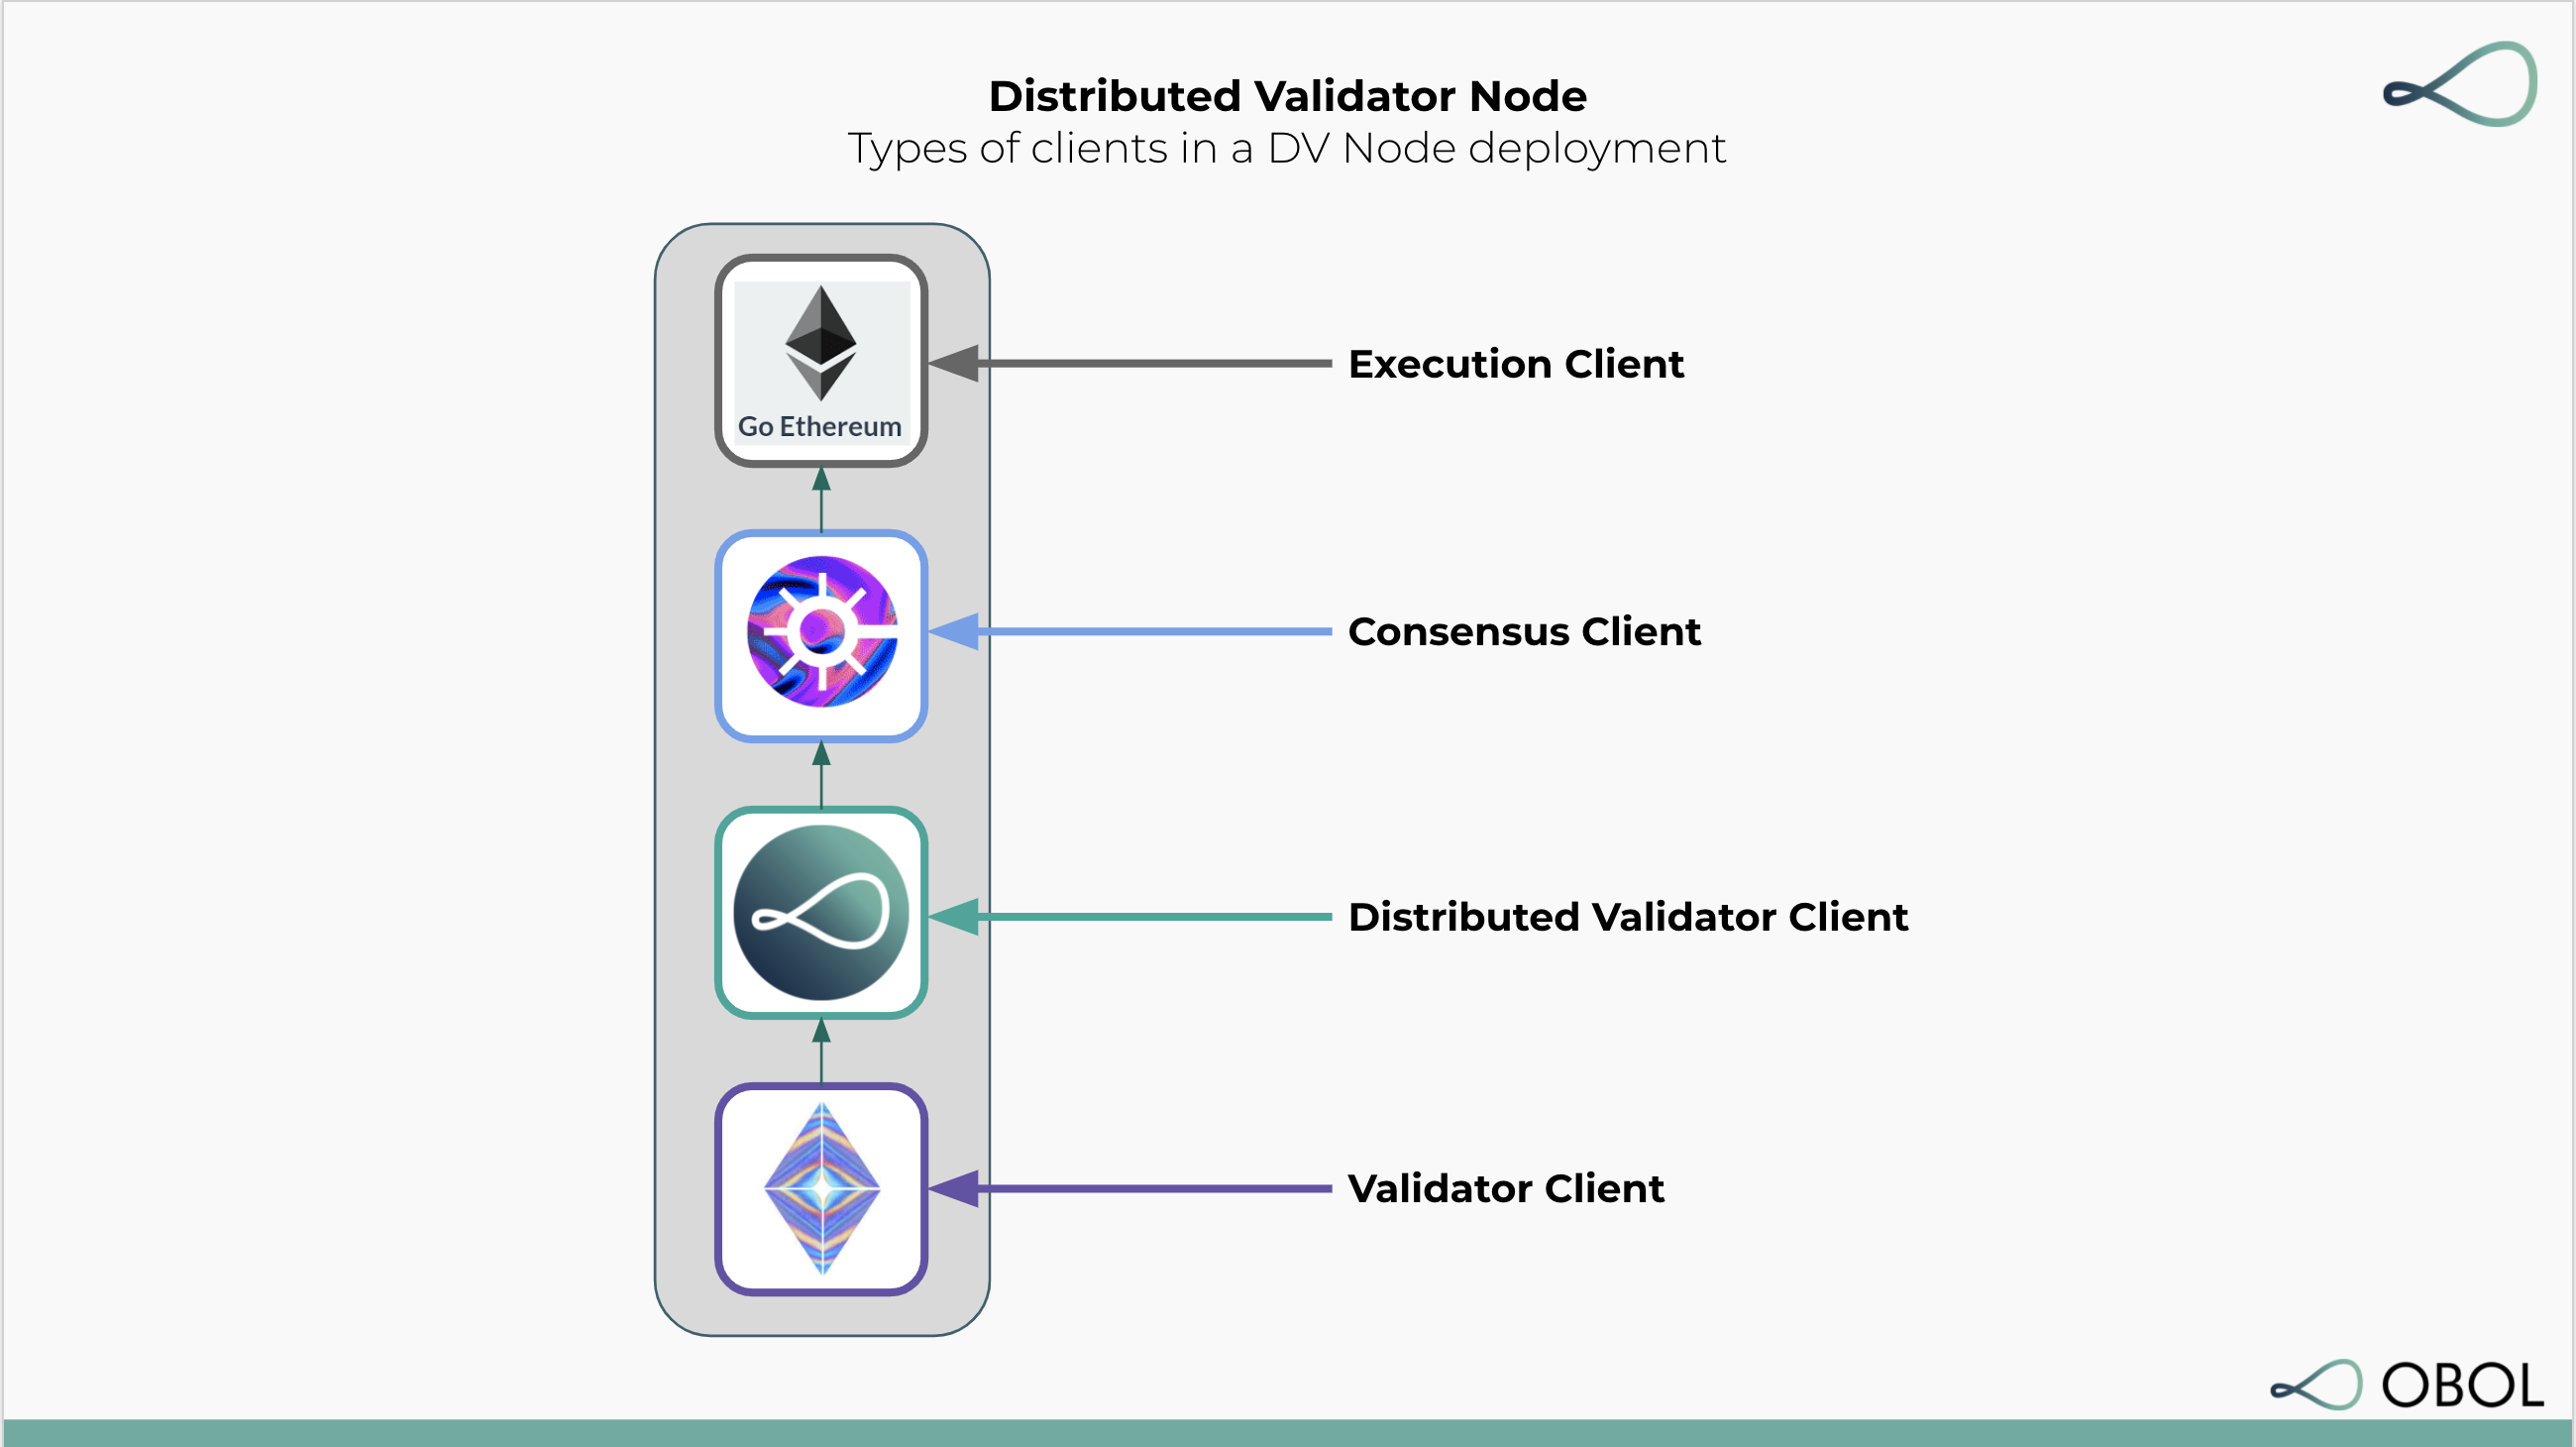 A Distributed Validator Node